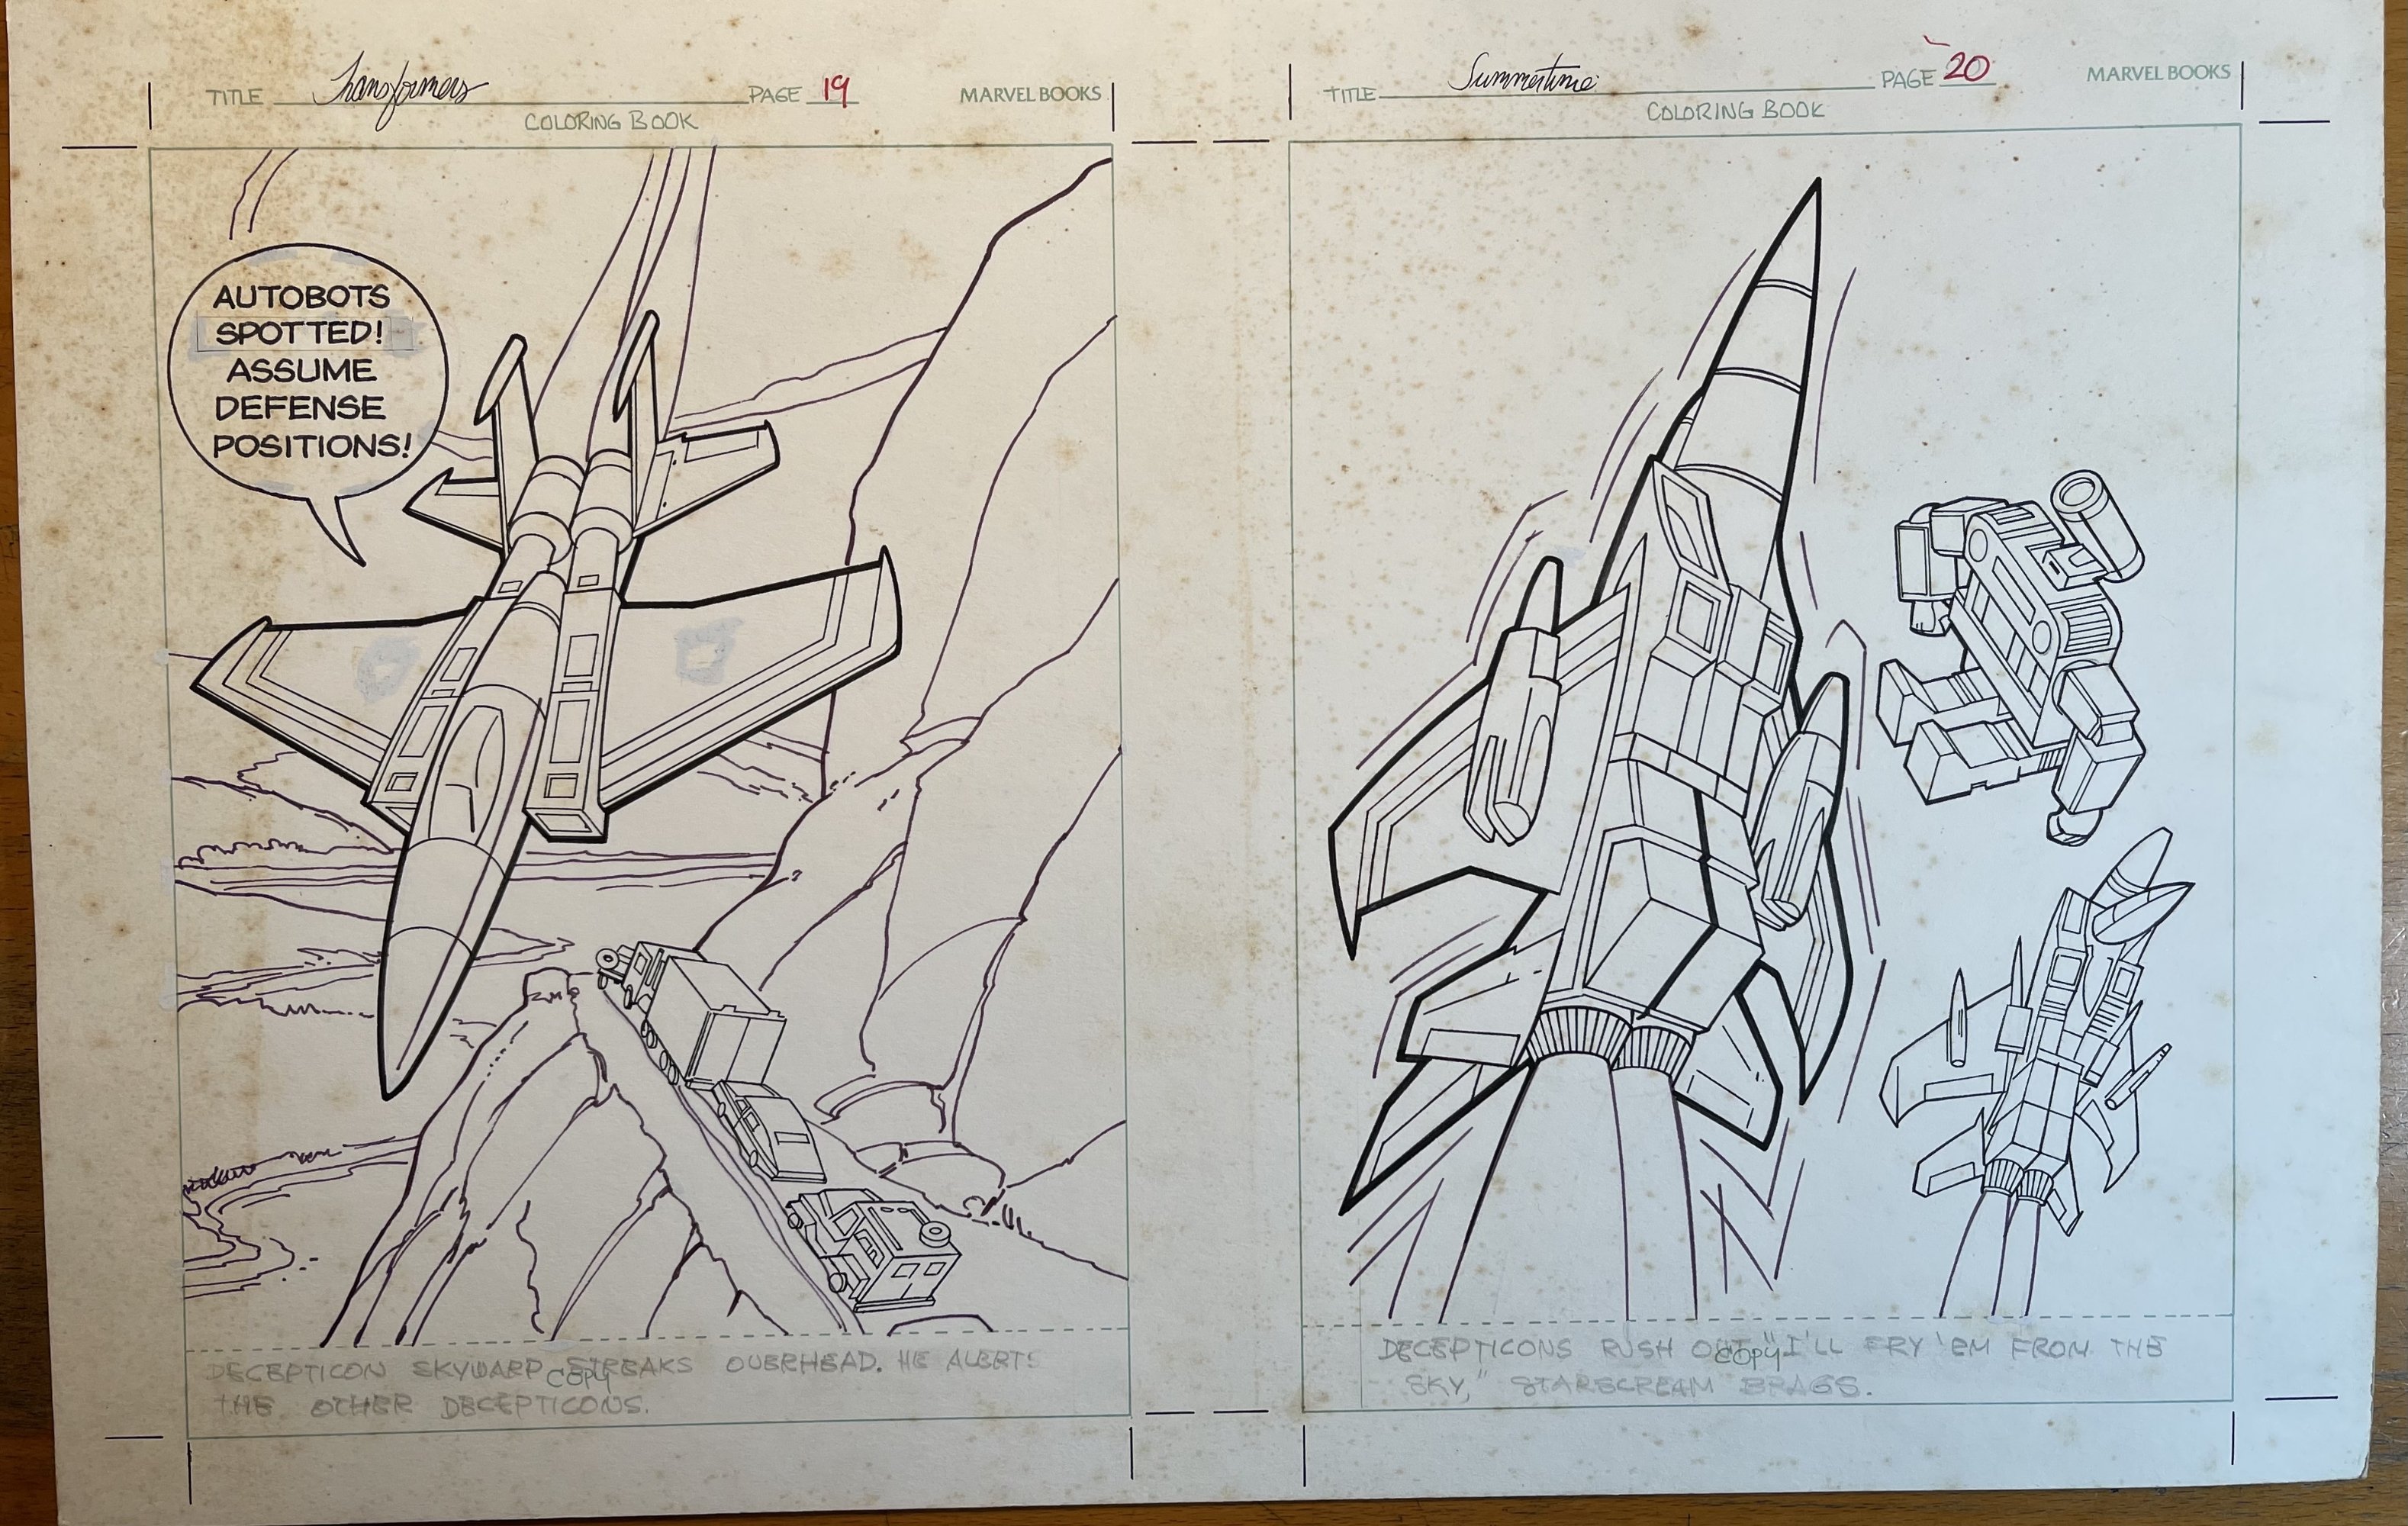 Download Transformers 19 20 In Frank Giella S Transformers Coloring Book Art 1984 Comic Art Gallery Room